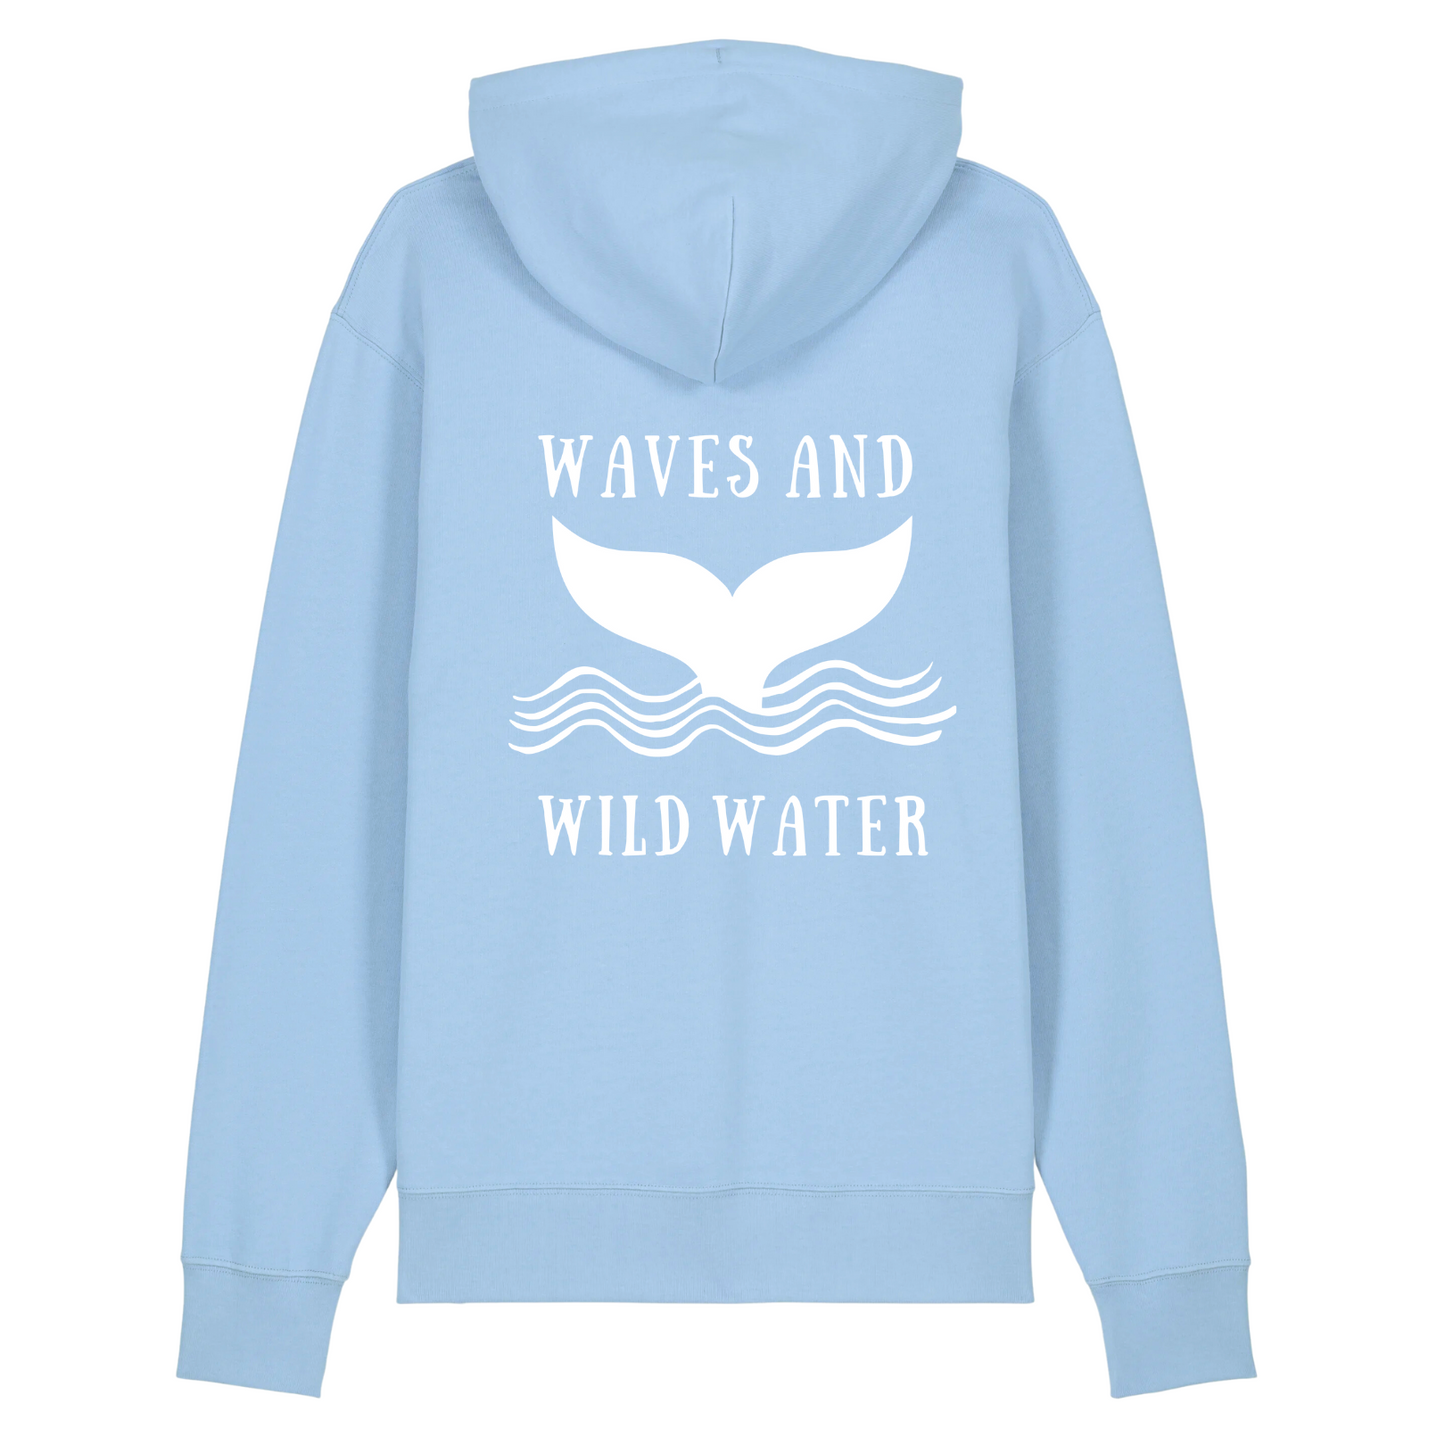 This sky blue hoodie from the Beach Hut Hoodies collection with a white hand printed Waves and Wild Water logo on the back, is just perfect for us to pop on after a bracing cold water swim.